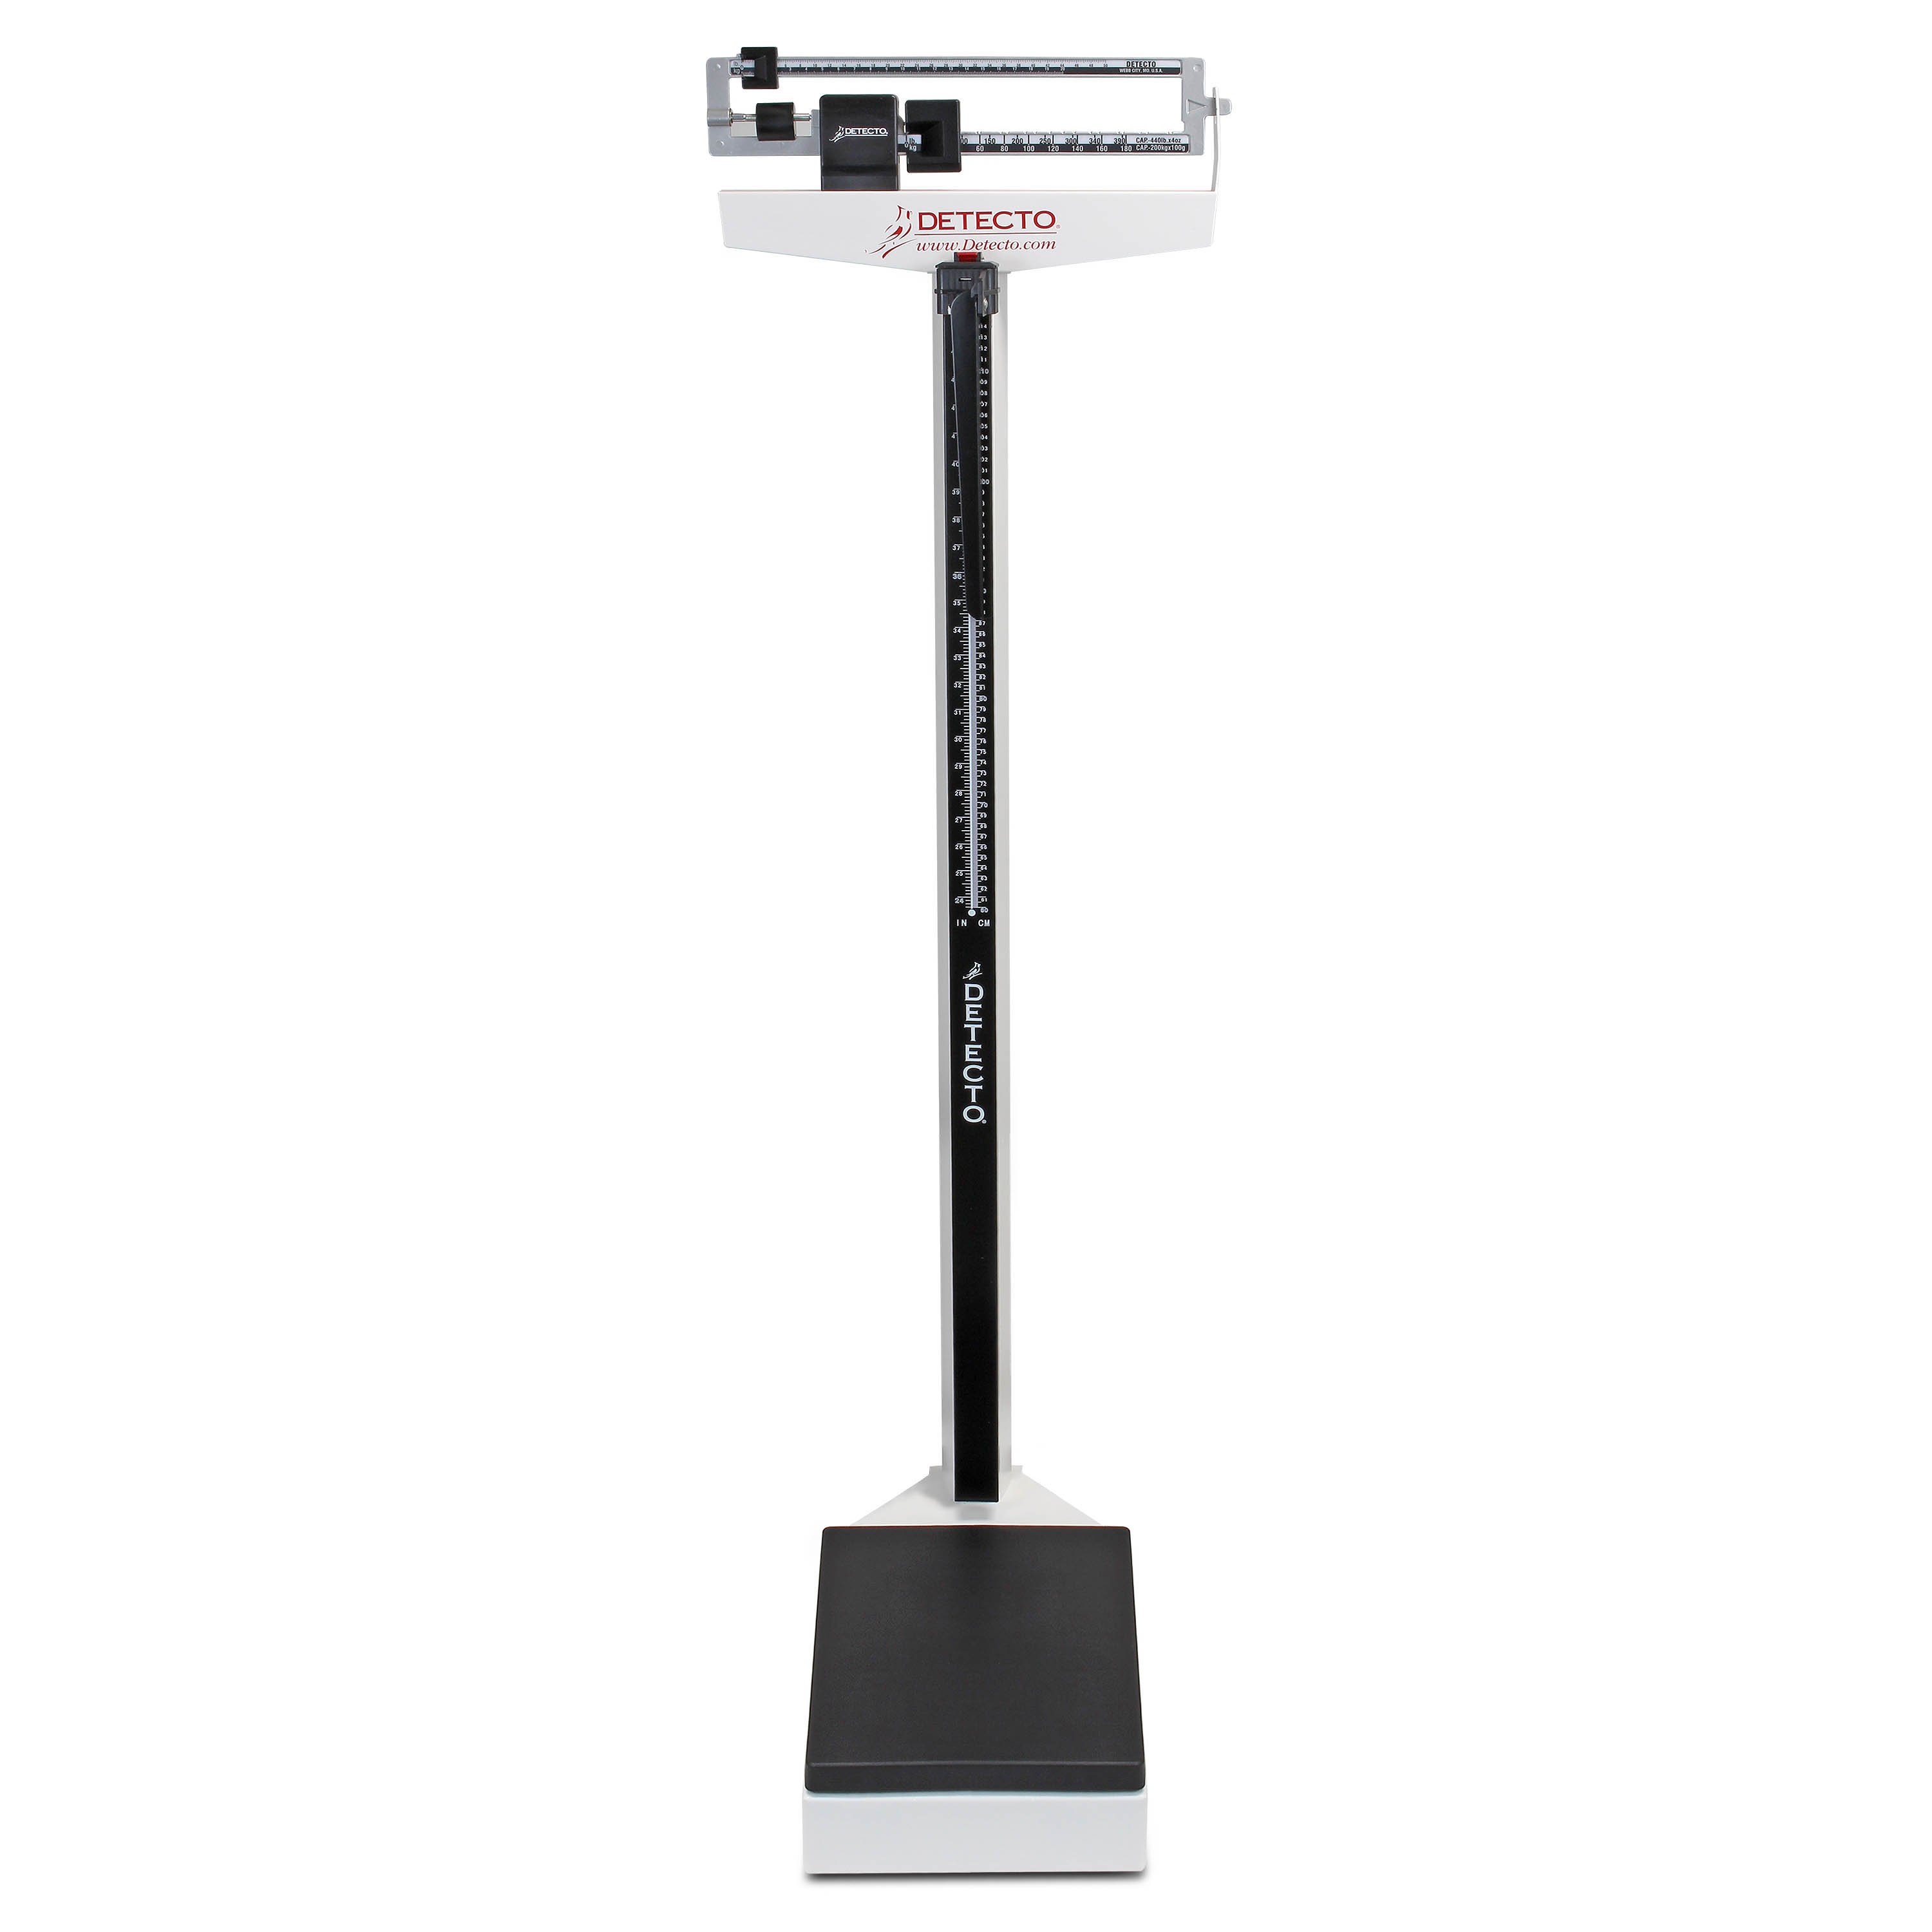 Mechanical Eye-Level Scale - White - Lb & Kg Display - Capacity 440 lb/200 kg - With Height Rod